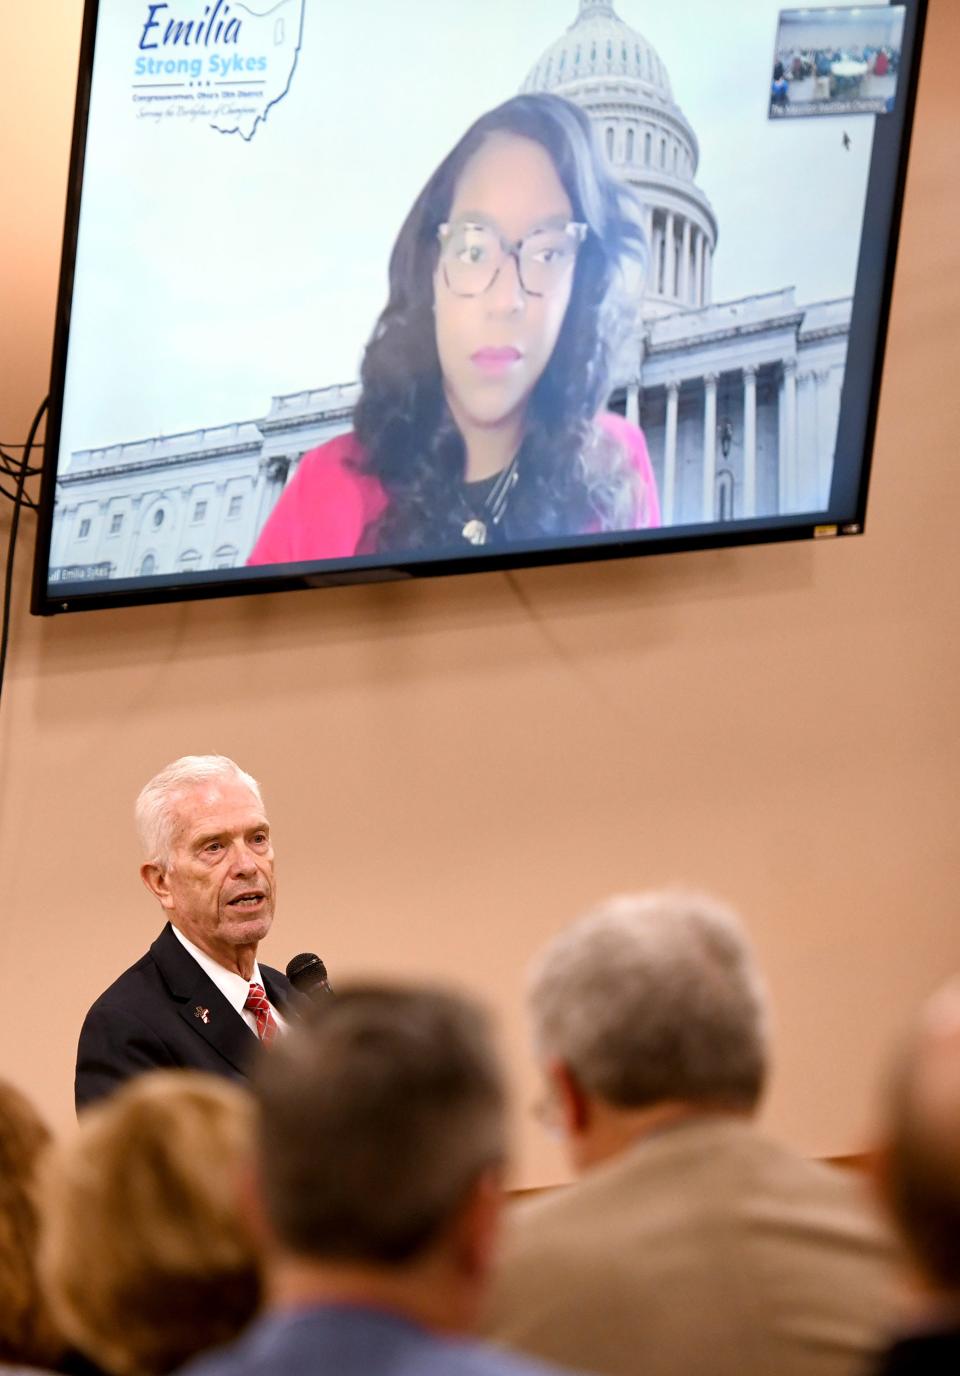 Congresswoman Emilia Strong Sykes on screen and Congressman Bill Johnson answer question during The Massillon WestStark Chamber of Commerce annual legislative breakfast at Fraternal Order of Eagles in Massillon.  Friday,  March 03, 2023.